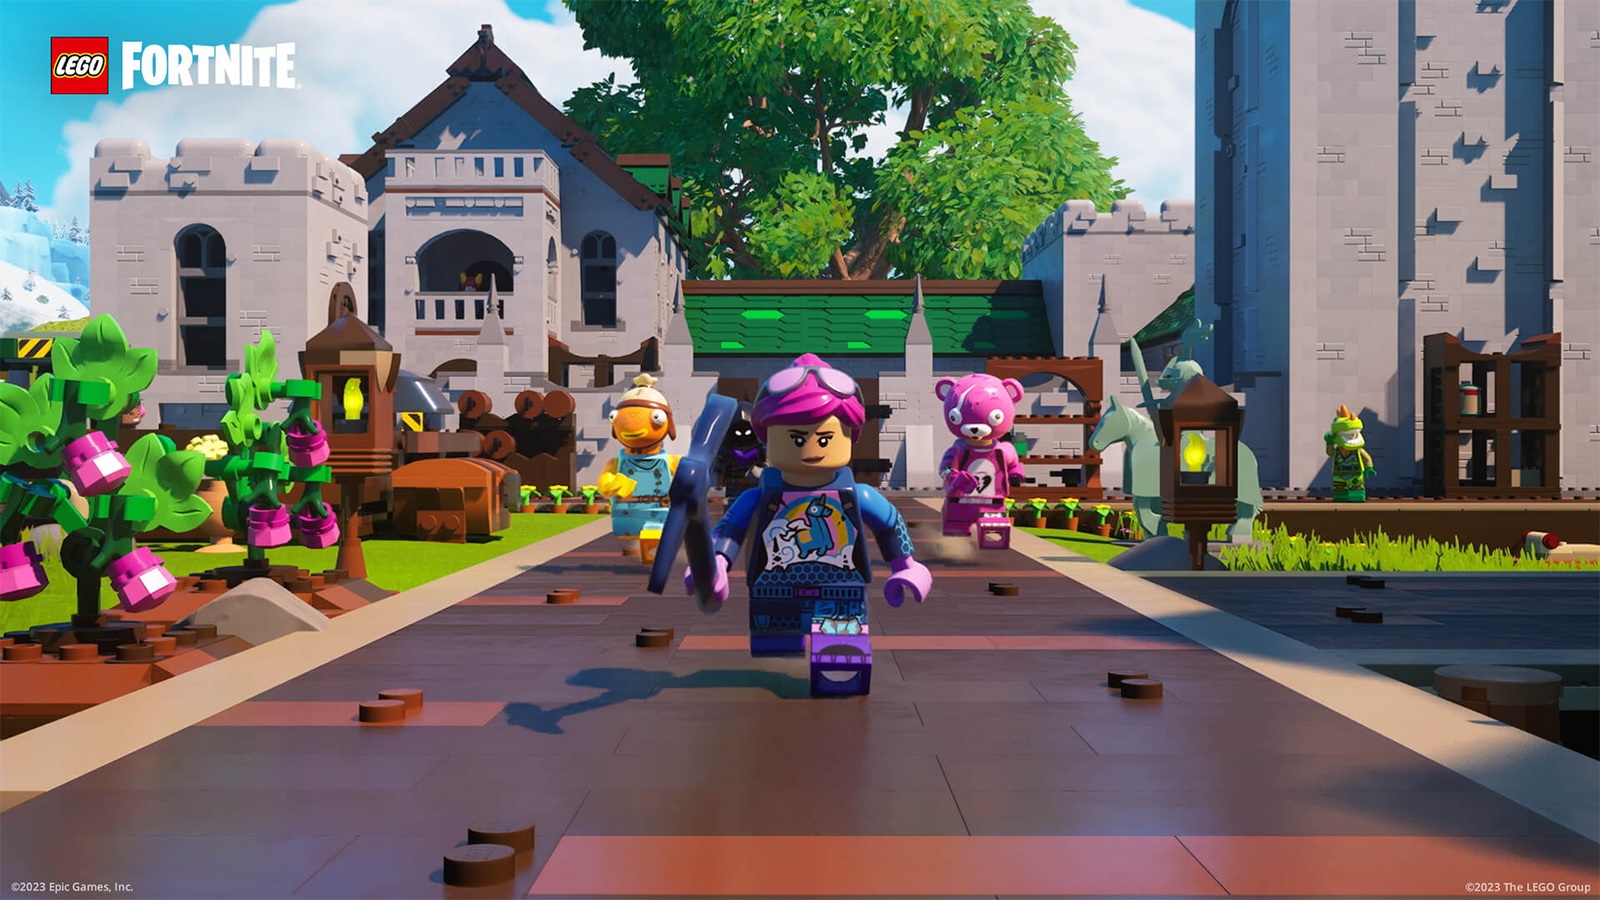 7 tips to get started with LEGO Fortnite